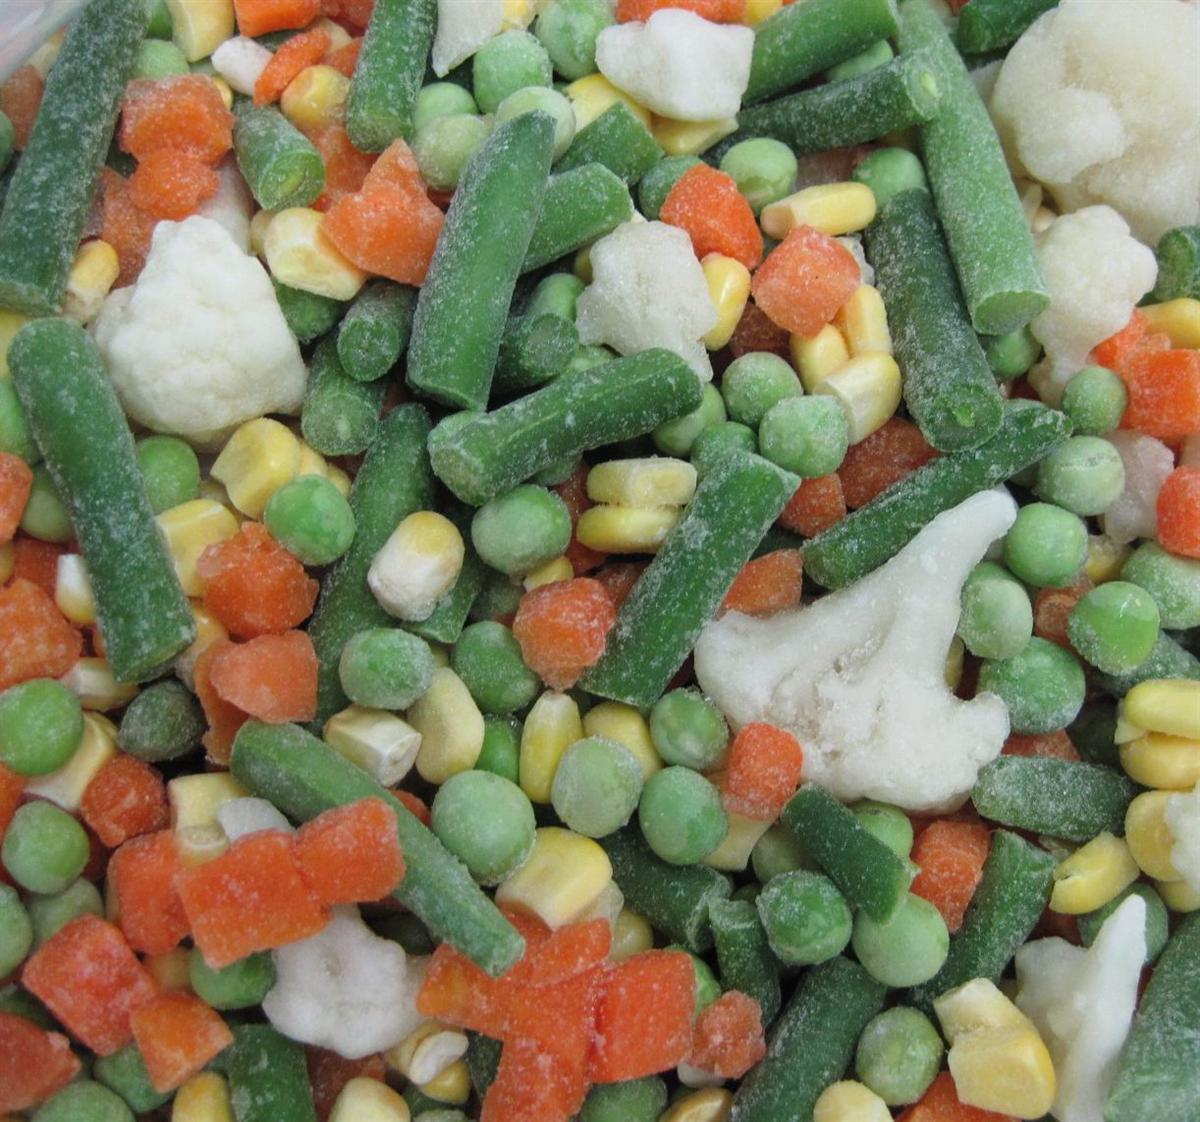 <p>Mix Vegetables are fairly good source of vitamins minerals and proteins.</p>
<p>Mix vegetables have high amounts of many antioxidant vitamins, including vitamin A, vitamin E and vitamin C.</p>
<p>Another great feature of fresh Mix vegetables, especially to those watching their weight, is the high nutrition, low fat, and low calorie nature of these foods. Mix vegetables contain very low levels of fats, and a diet low in fat can be quite effective for long-term weight loss.</p>